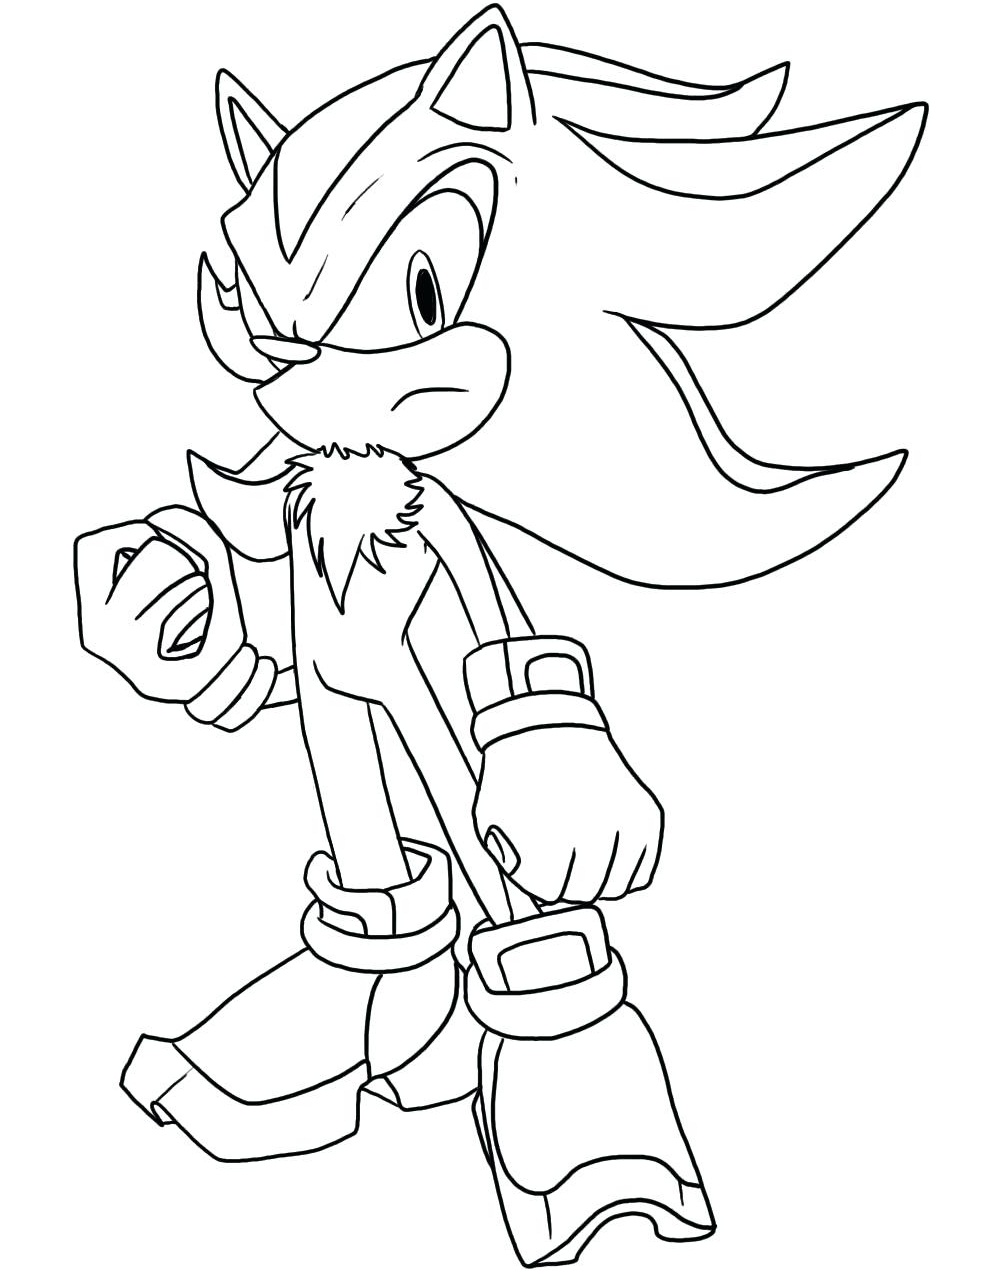 Shadow The Hedgehog Coloring Page - Free Printable Coloring Pages for Kids